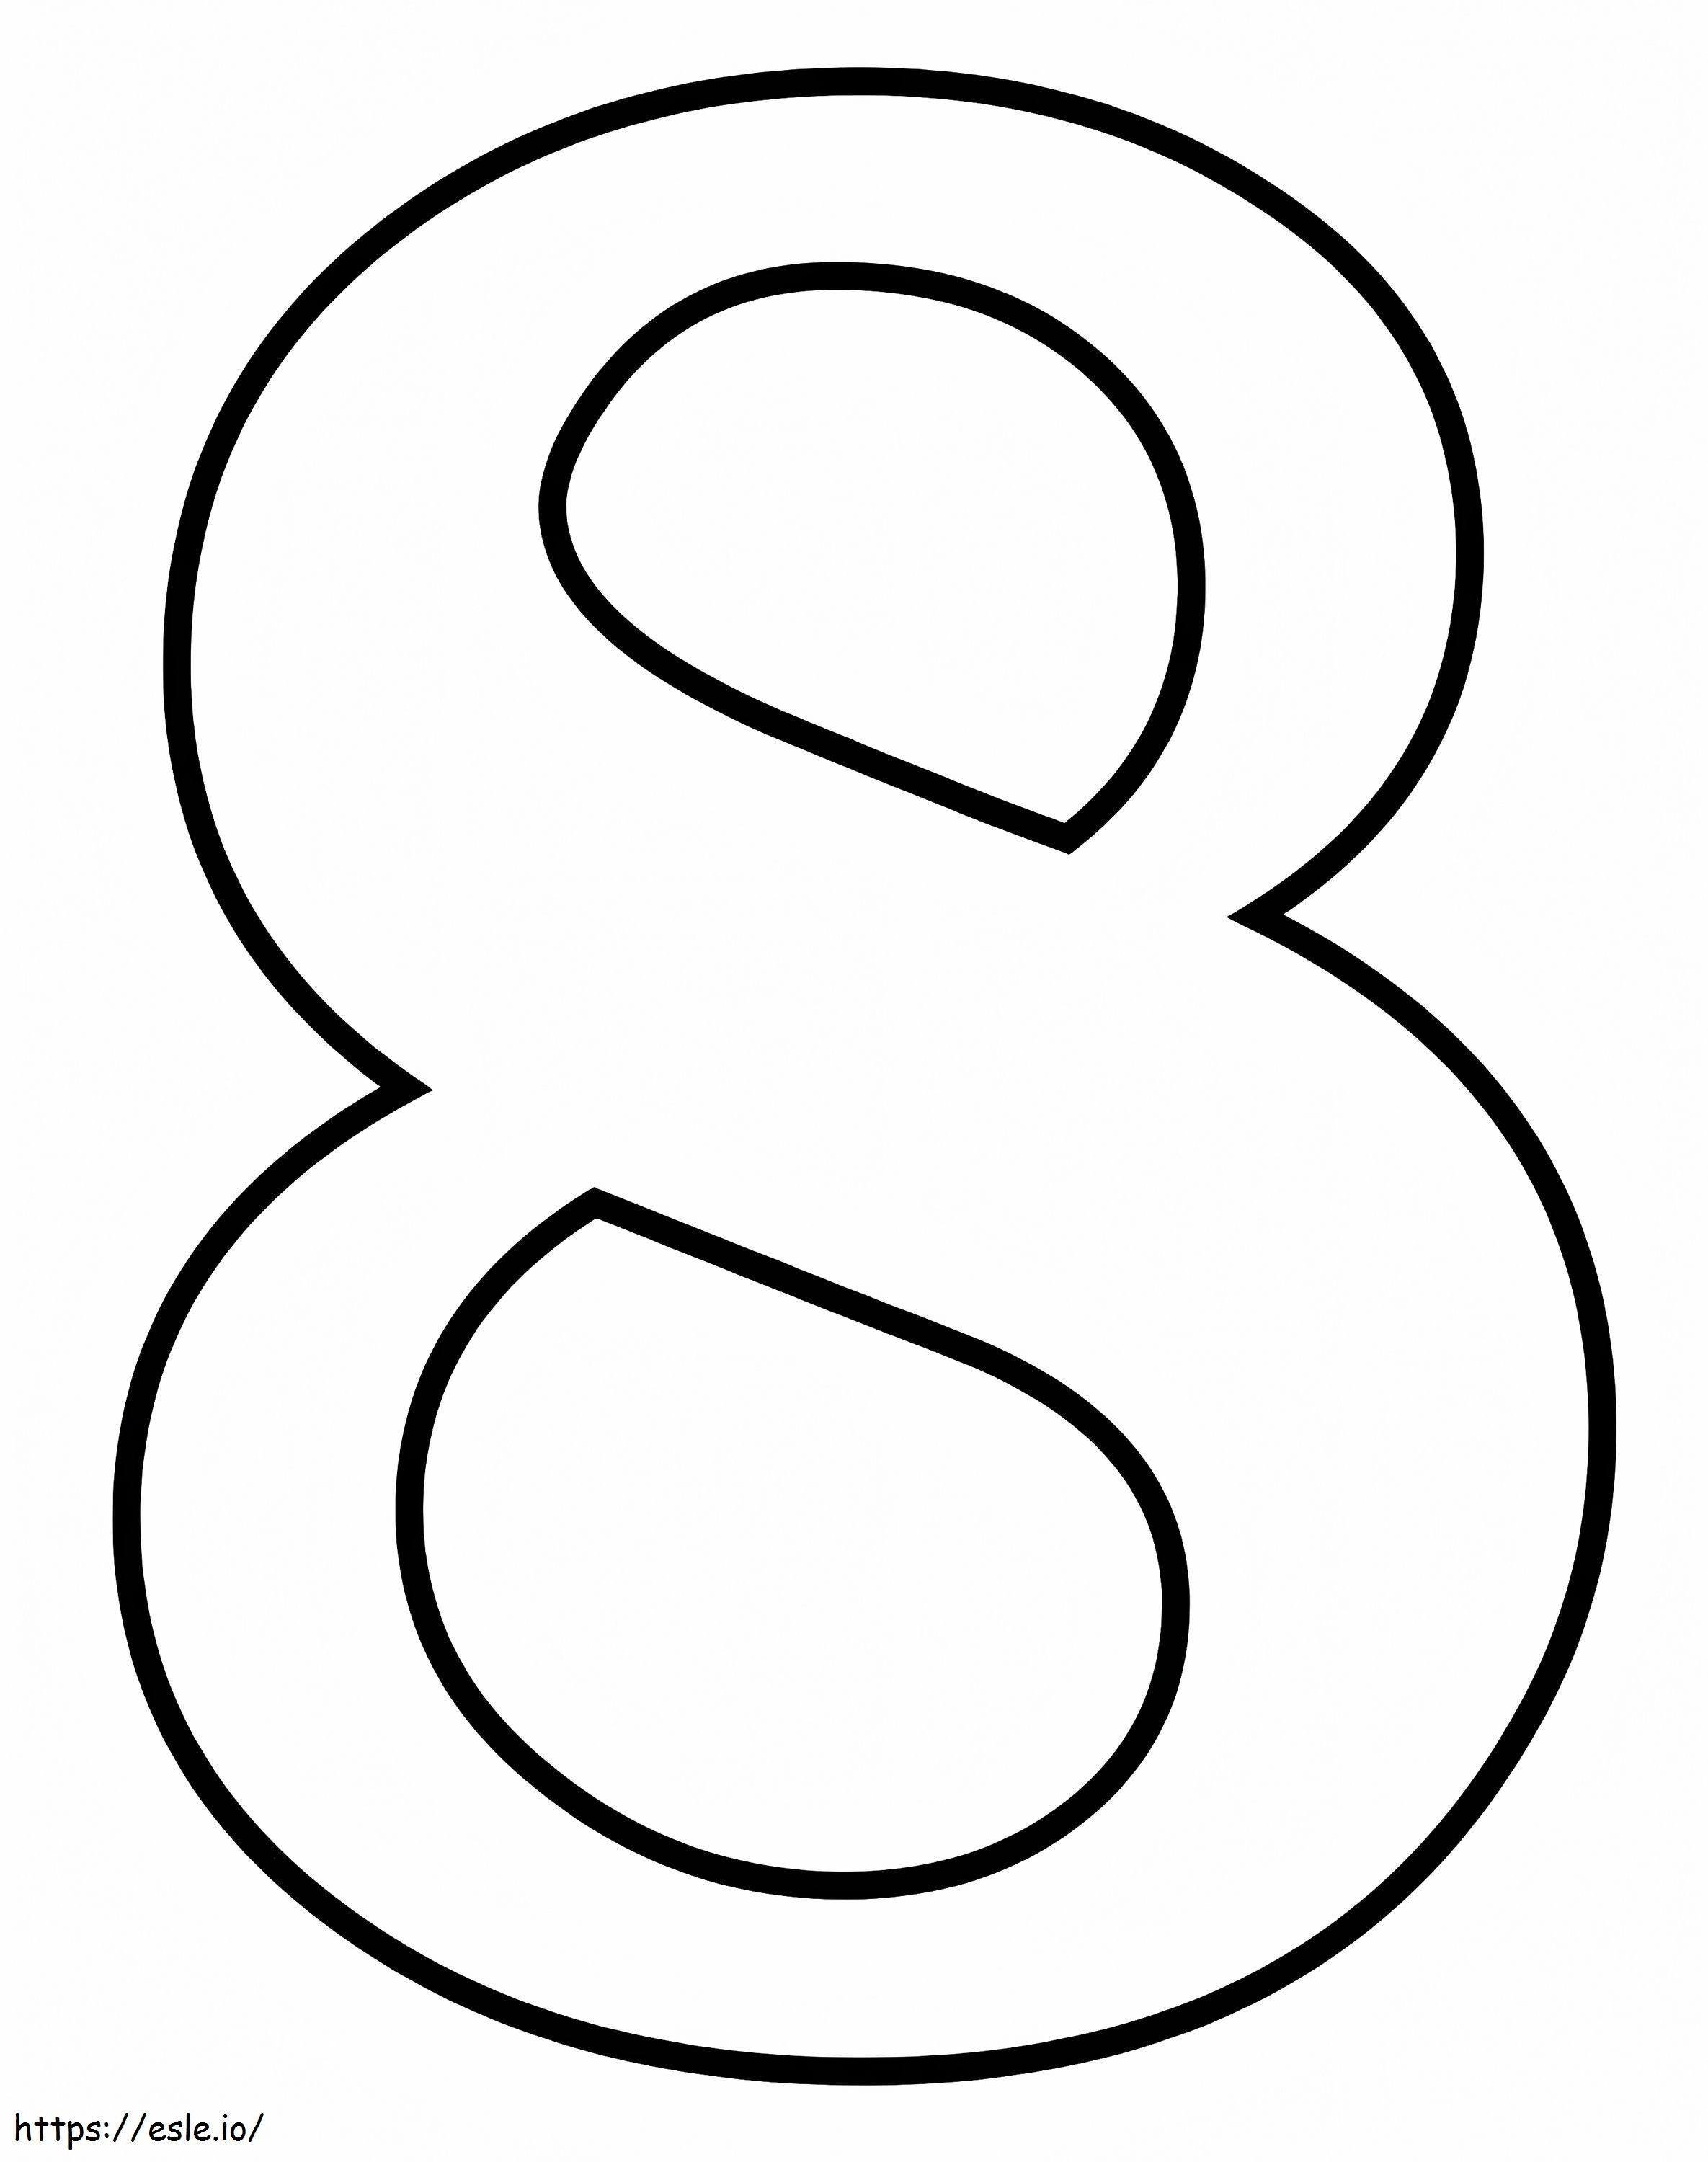 Easy Number 8 coloring page